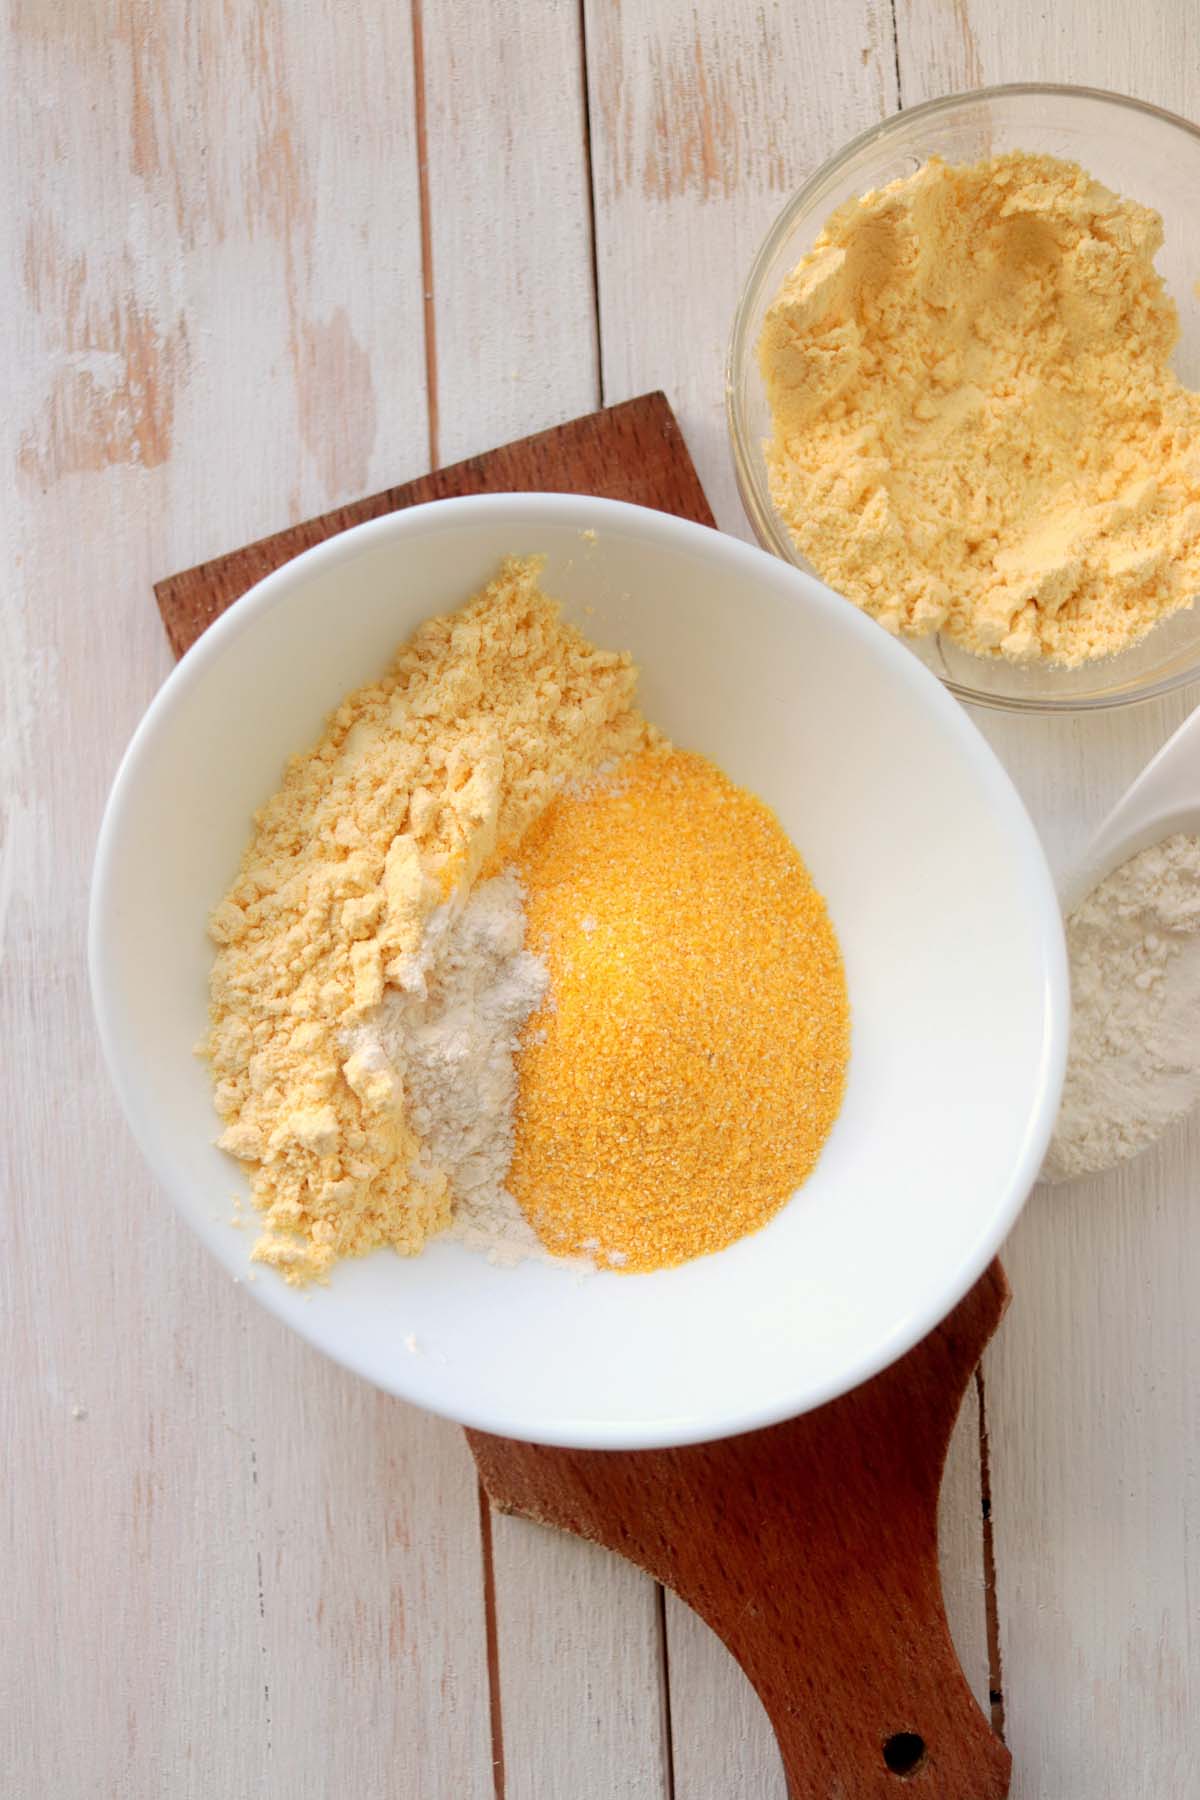 Cornmeal and baking powder in a bowl.